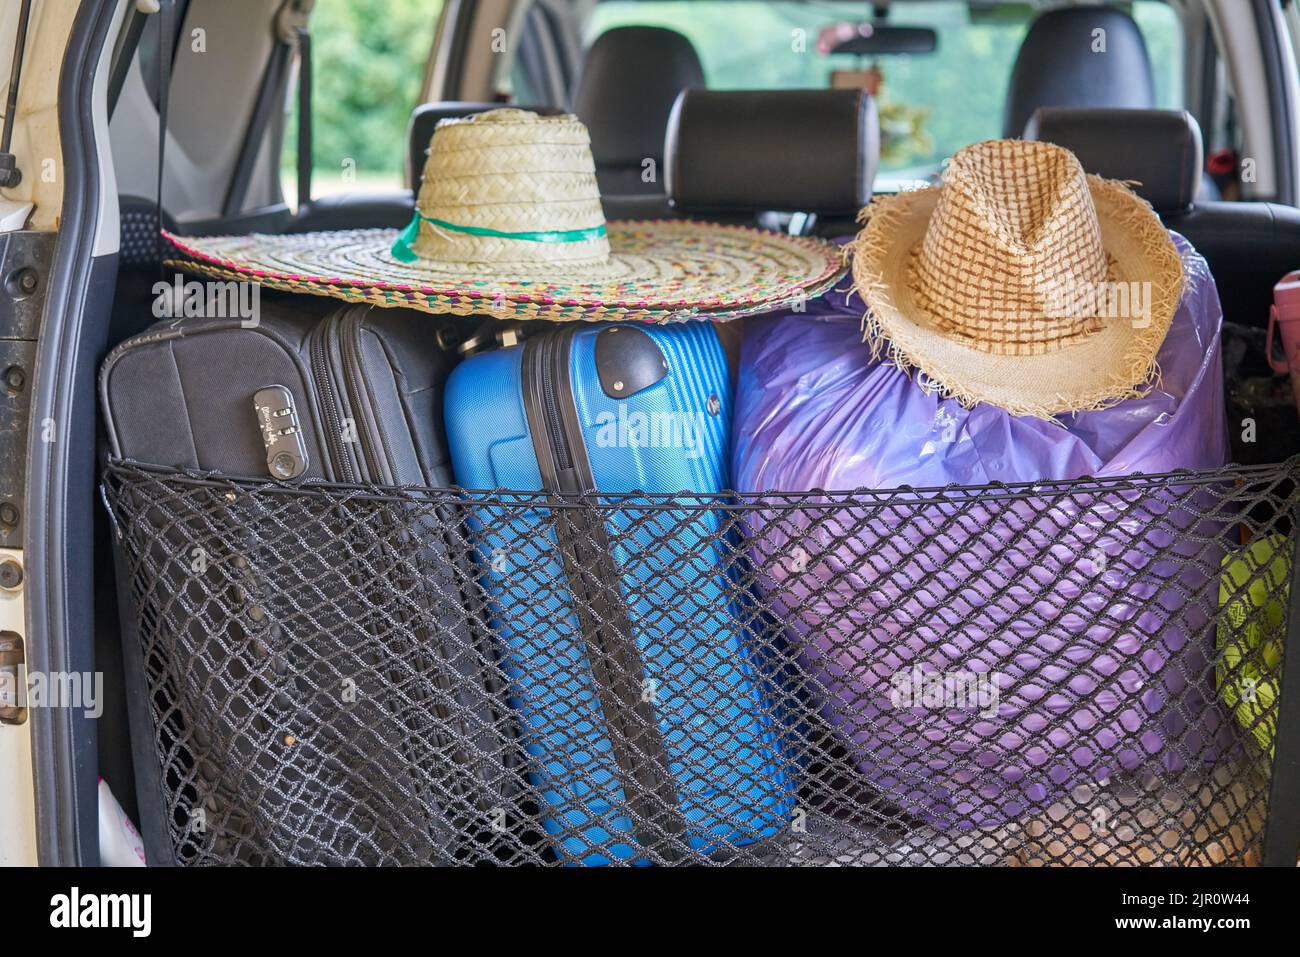 A car packed ready for travel, with sun hats and suitcases. Stock Photo